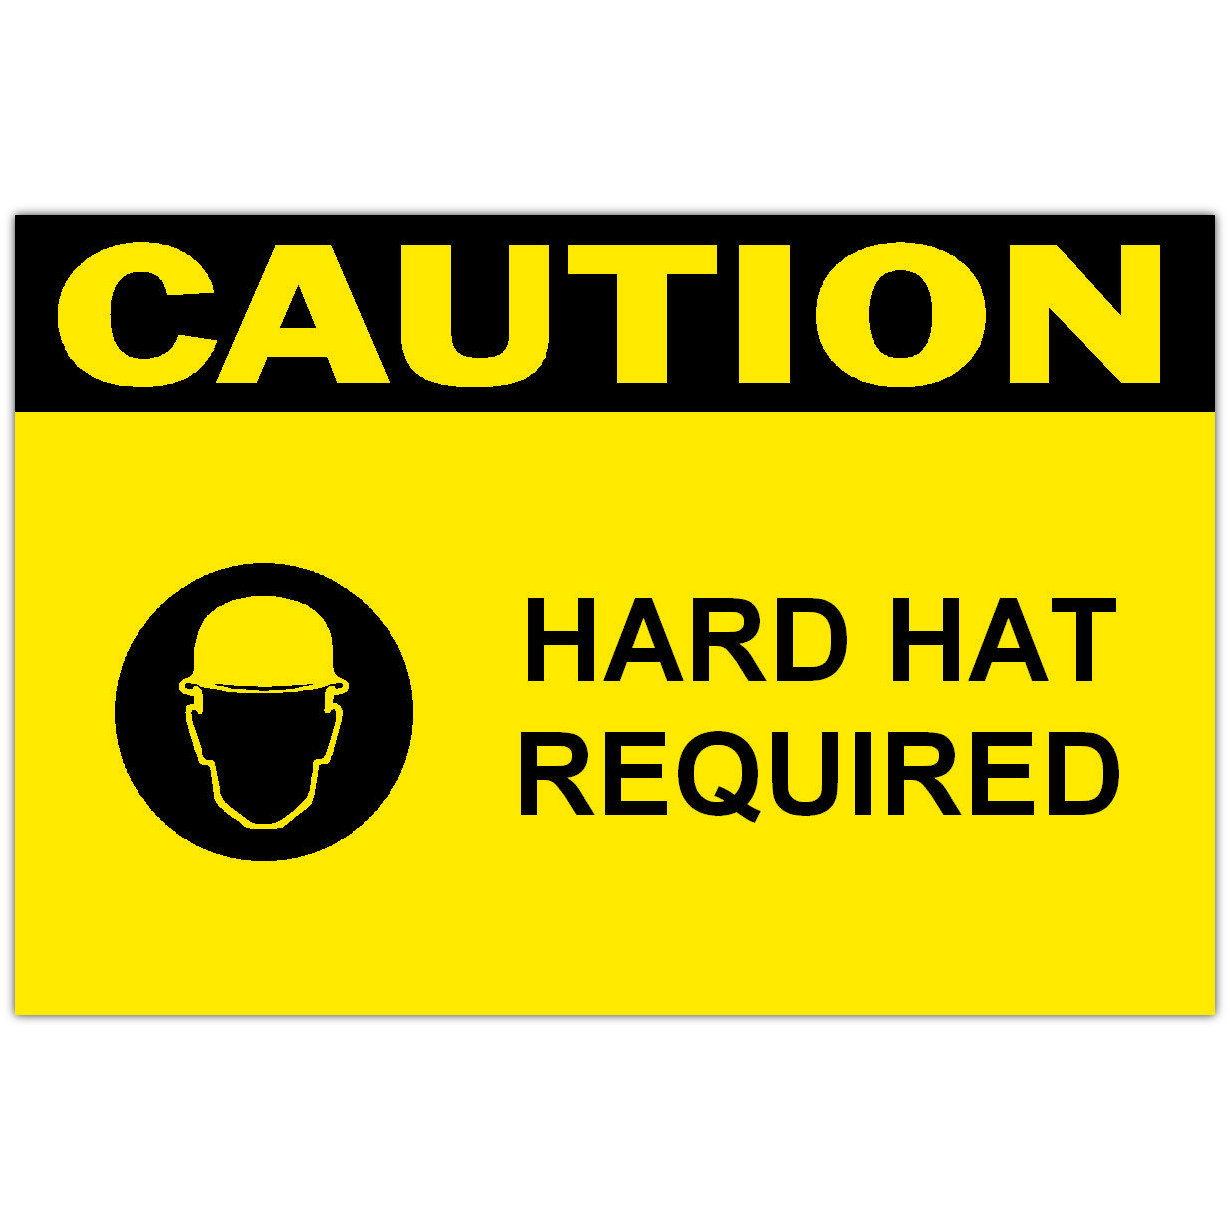 4in x 6in CAUTION Hard Hat Required Safety Label